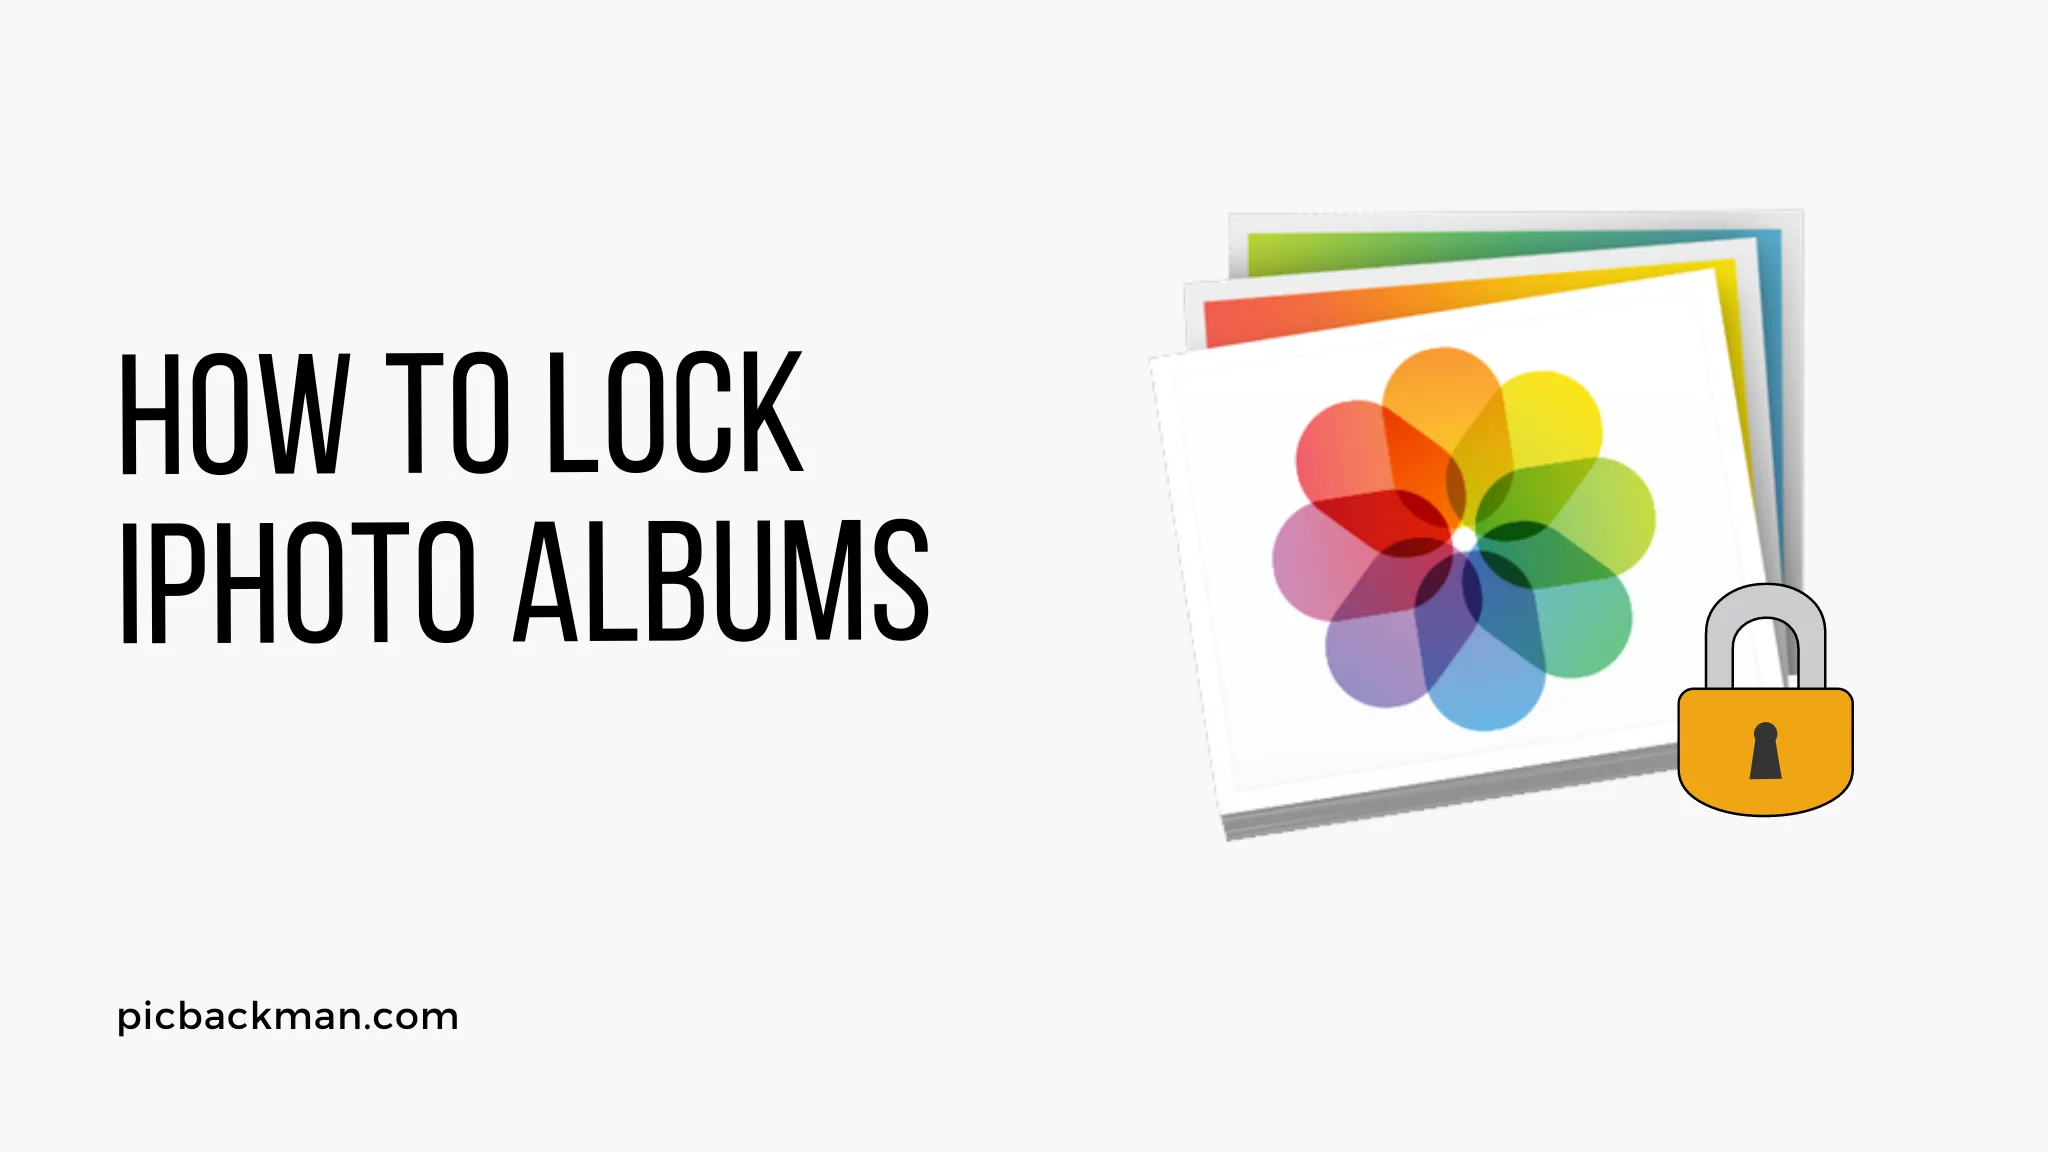 How to Lock iPhoto Albums?